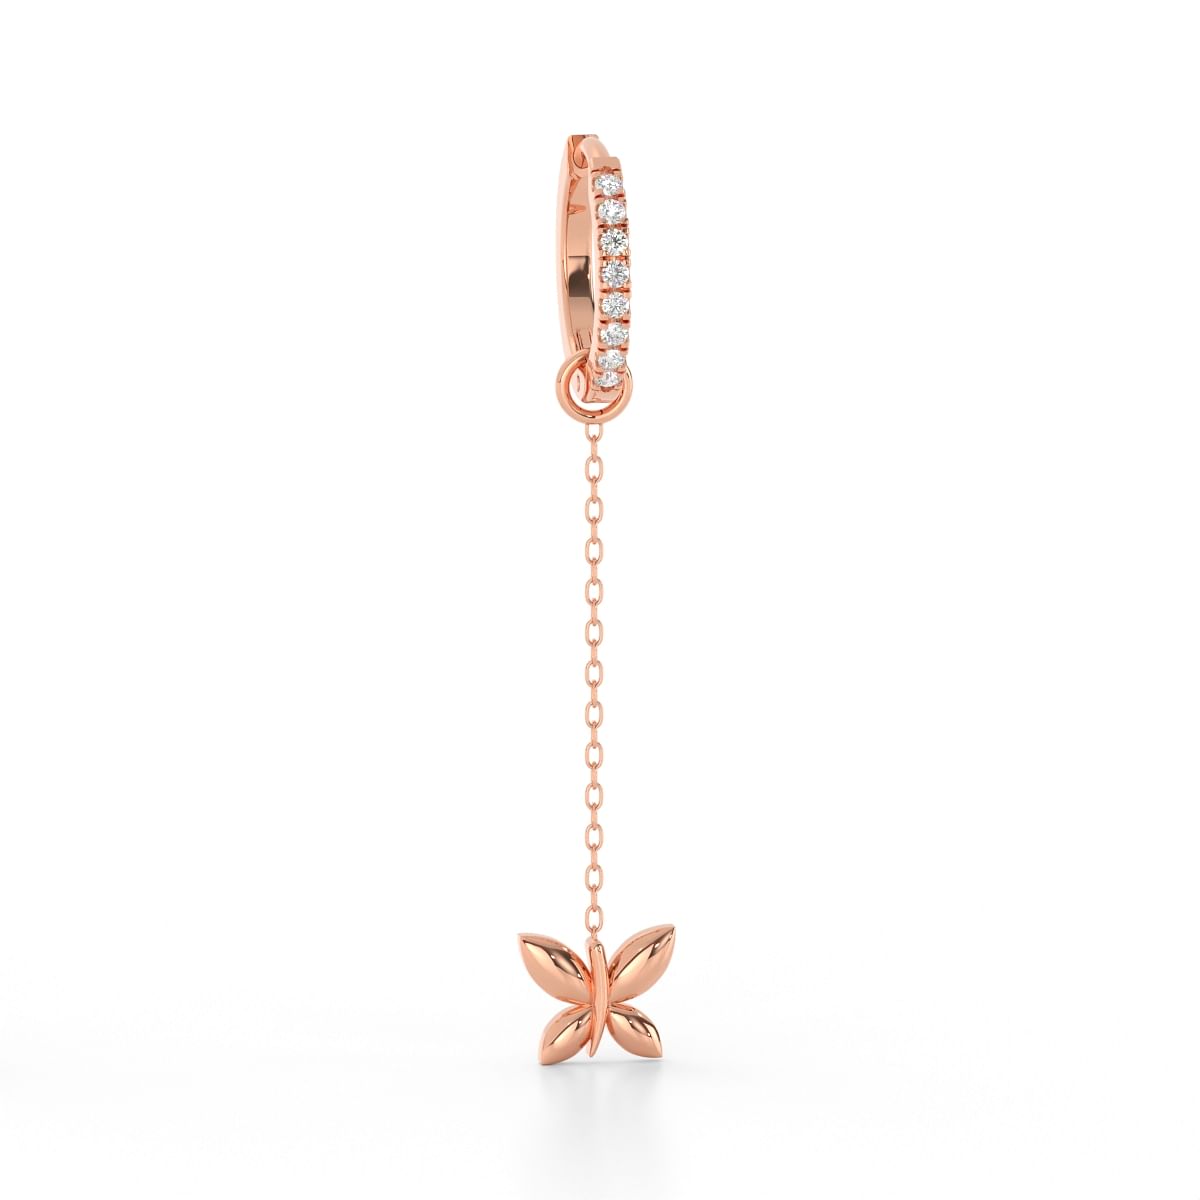 Rose gold Butterfly Gold Sui Dhaga Earrings